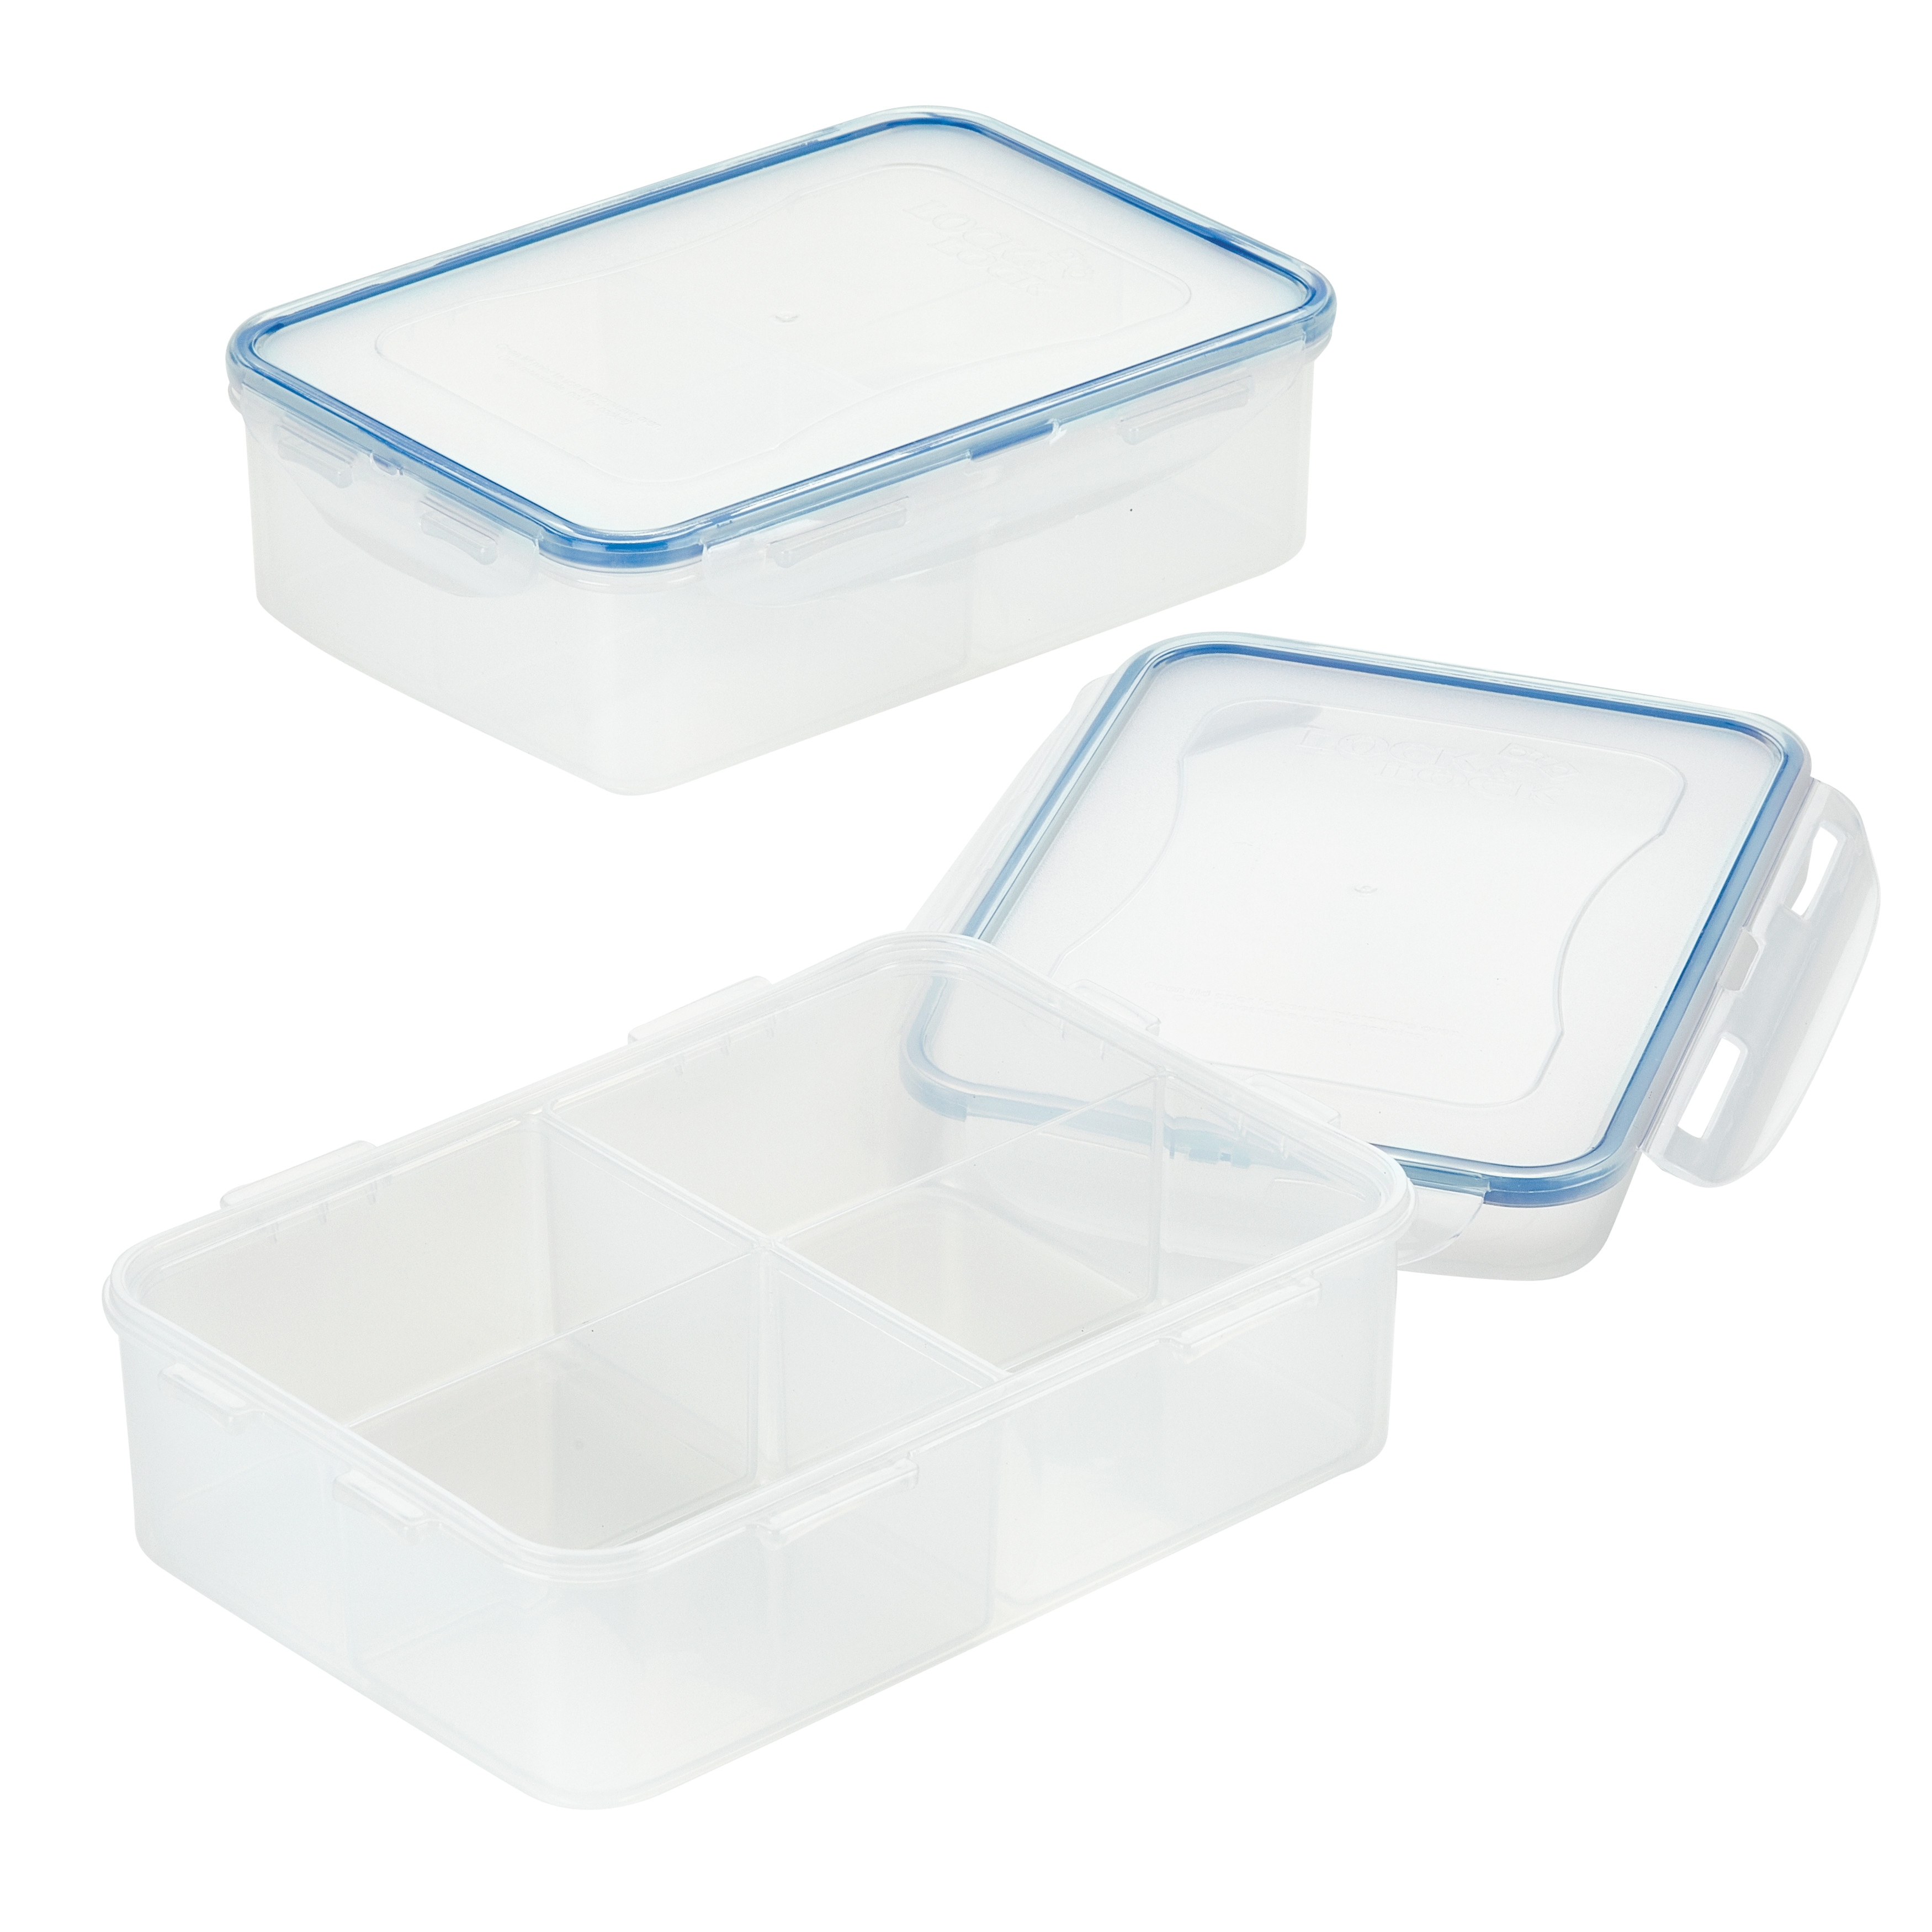 https://ak1.ostkcdn.com/images/products/is/images/direct/f92a8ddca3dd37ce8a62bb4a22a73316c7233e75/Easy-Essentials-Divided-Rectangular-Food-Storage-Containers%2C-54-Ounce%2C-Set-of-Two.jpg